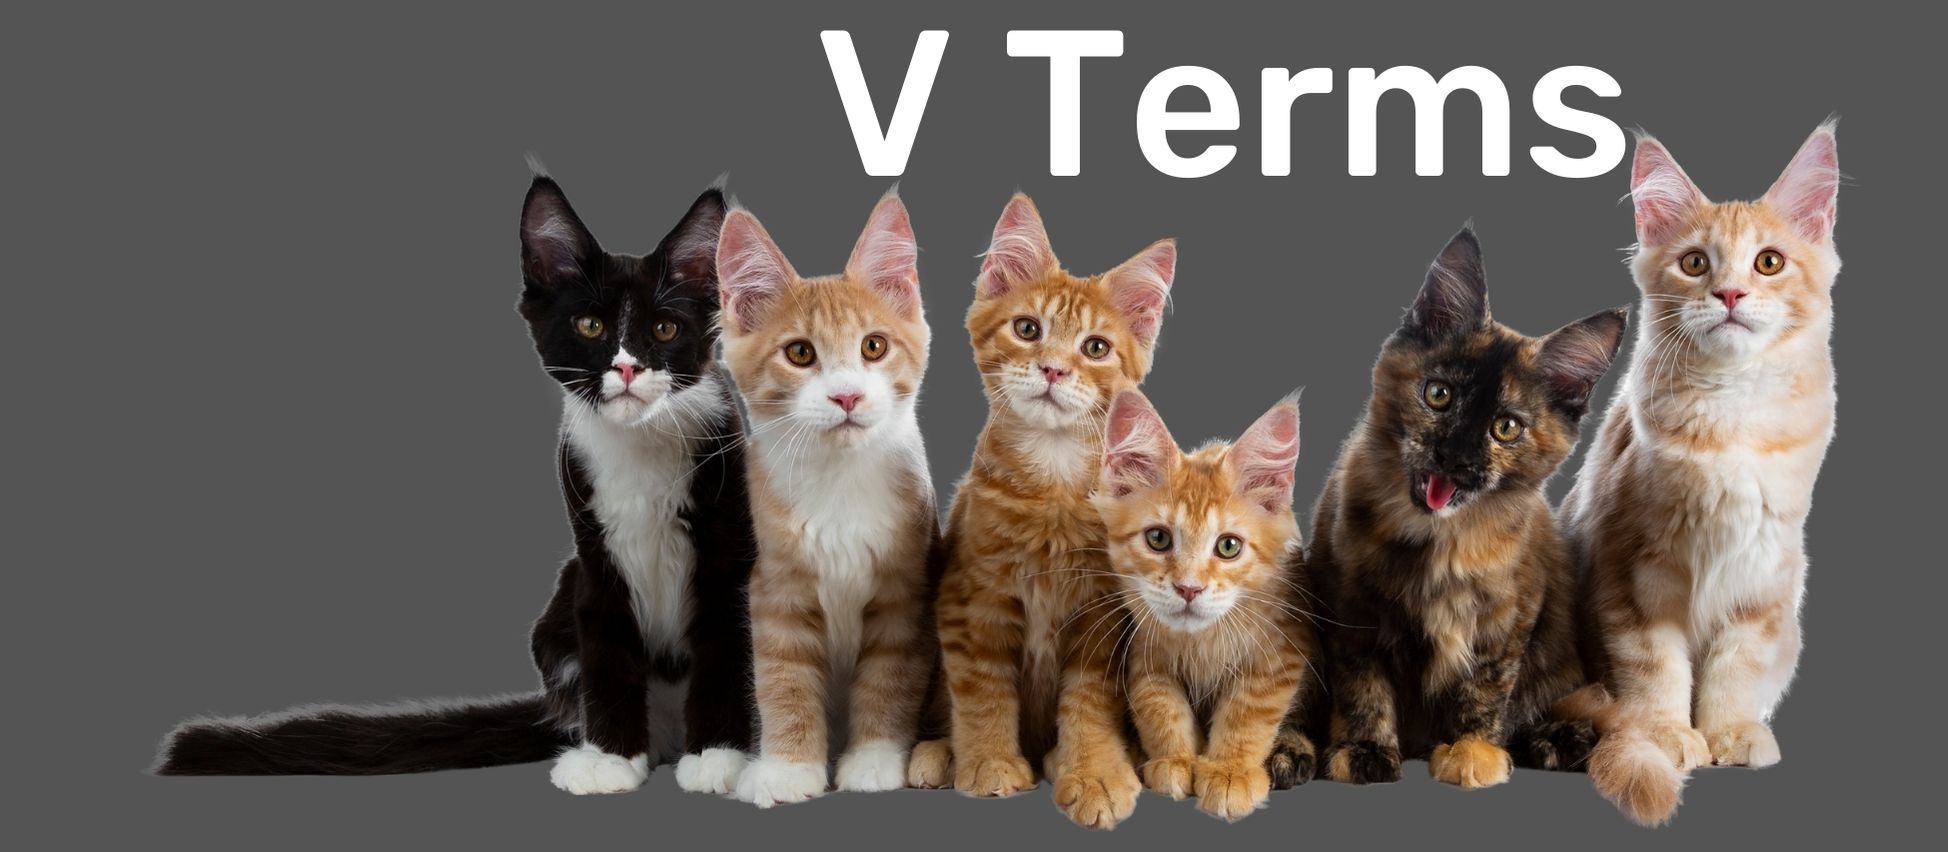 Group of six cats in front of a gray background with text reading 'V Terms' at the top to indicate a new section of the glossary